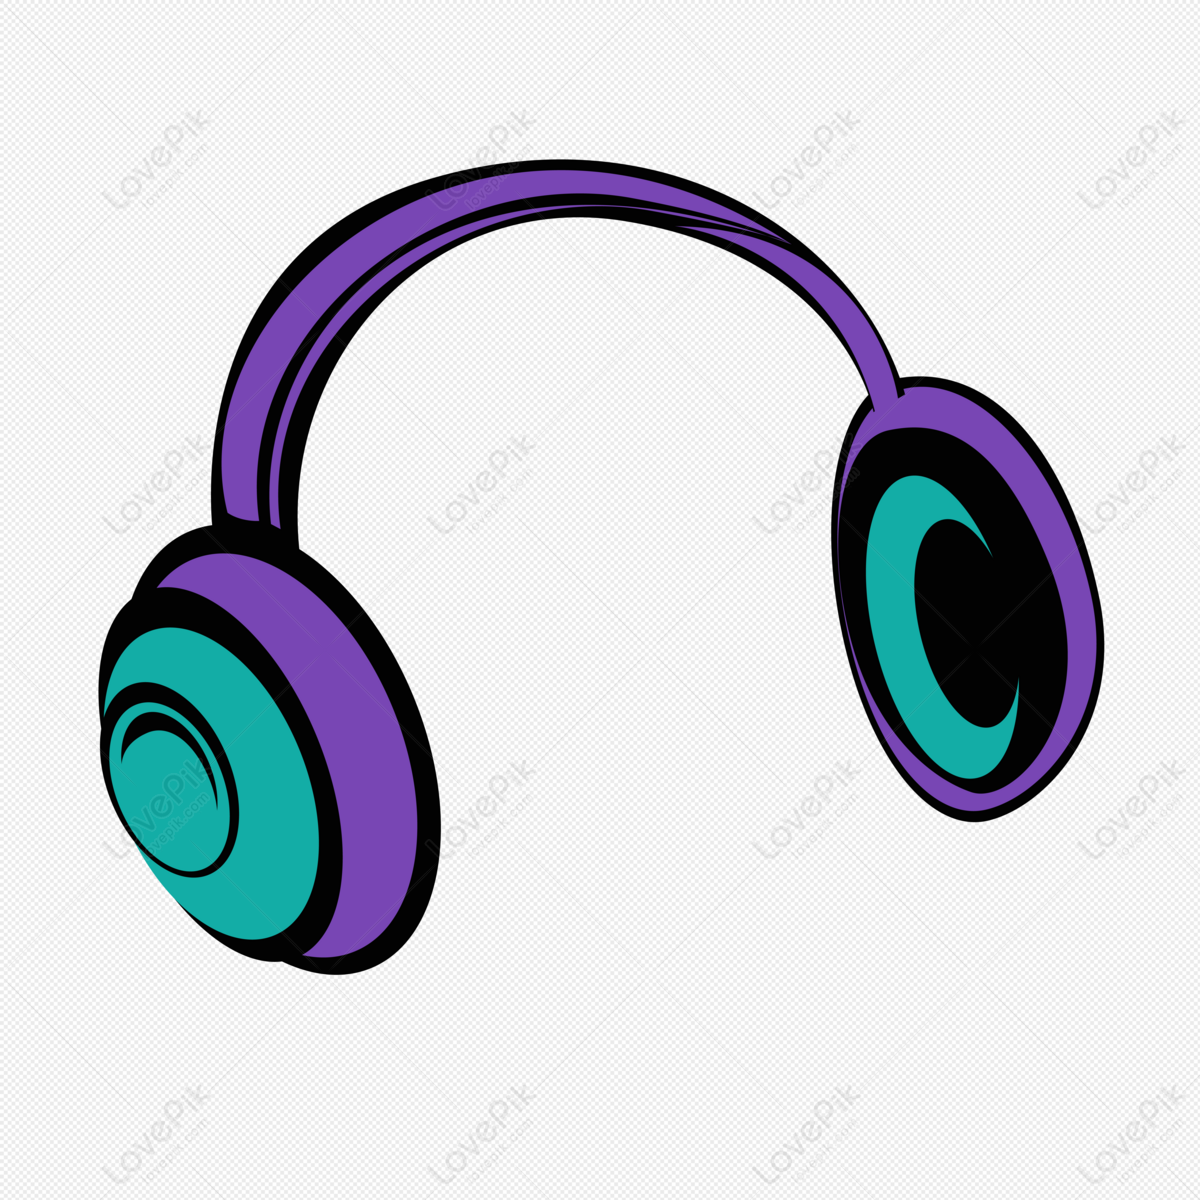 Headset PNG Transparent Background And Clipart Image For Free Download -  Lovepik | 401290800